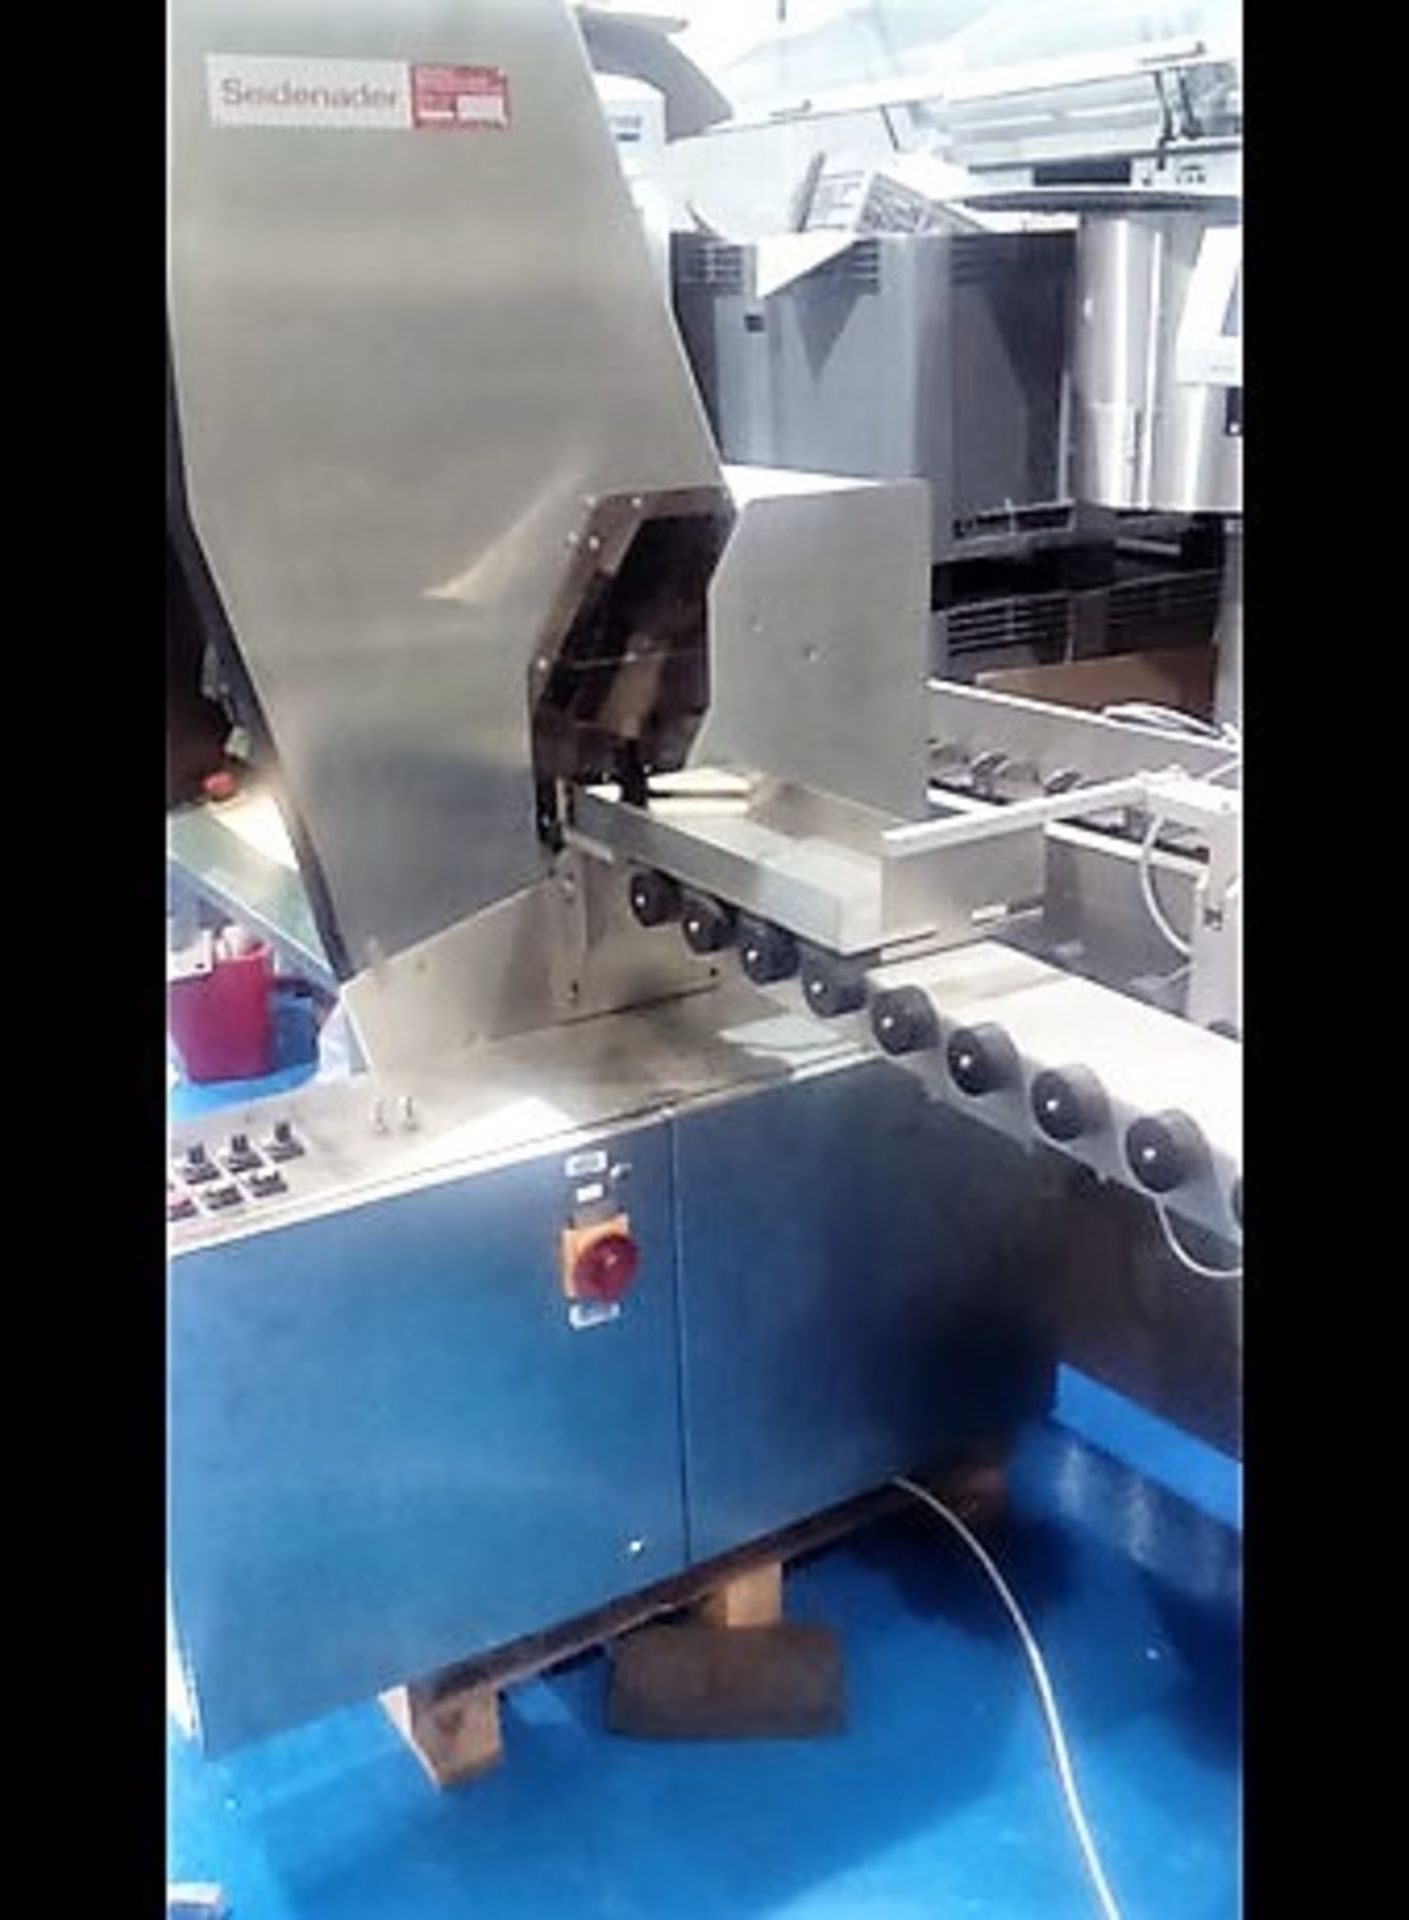 Seidenader V75 Inspection Machine Complete with fo - Image 2 of 4